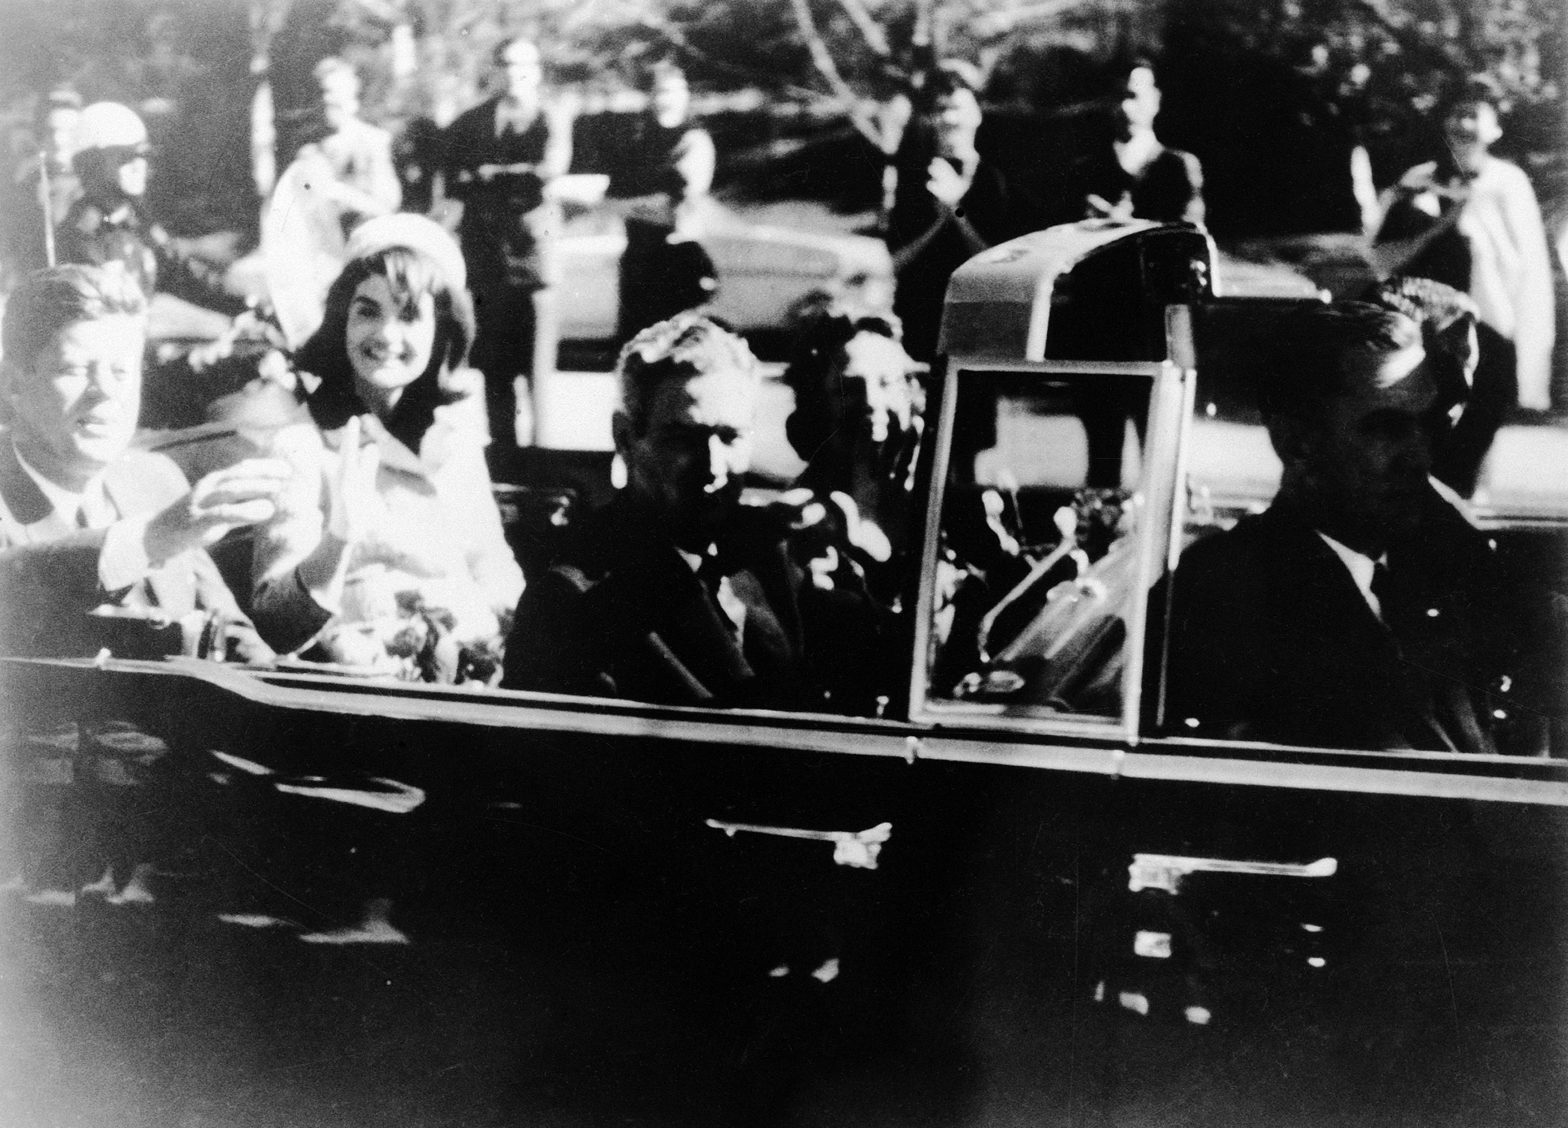 This is Warren Commission Exhibit No. 697, President John F. Kennedy at the extreme right on rear seat of his limousine during Dallas, Texas motorcade, Nov. 22, 1963. His wife, Jacqueline, beside him , Gov. John Connally of Texas and his wife were on jump seats in front of the President. (AP Photo)